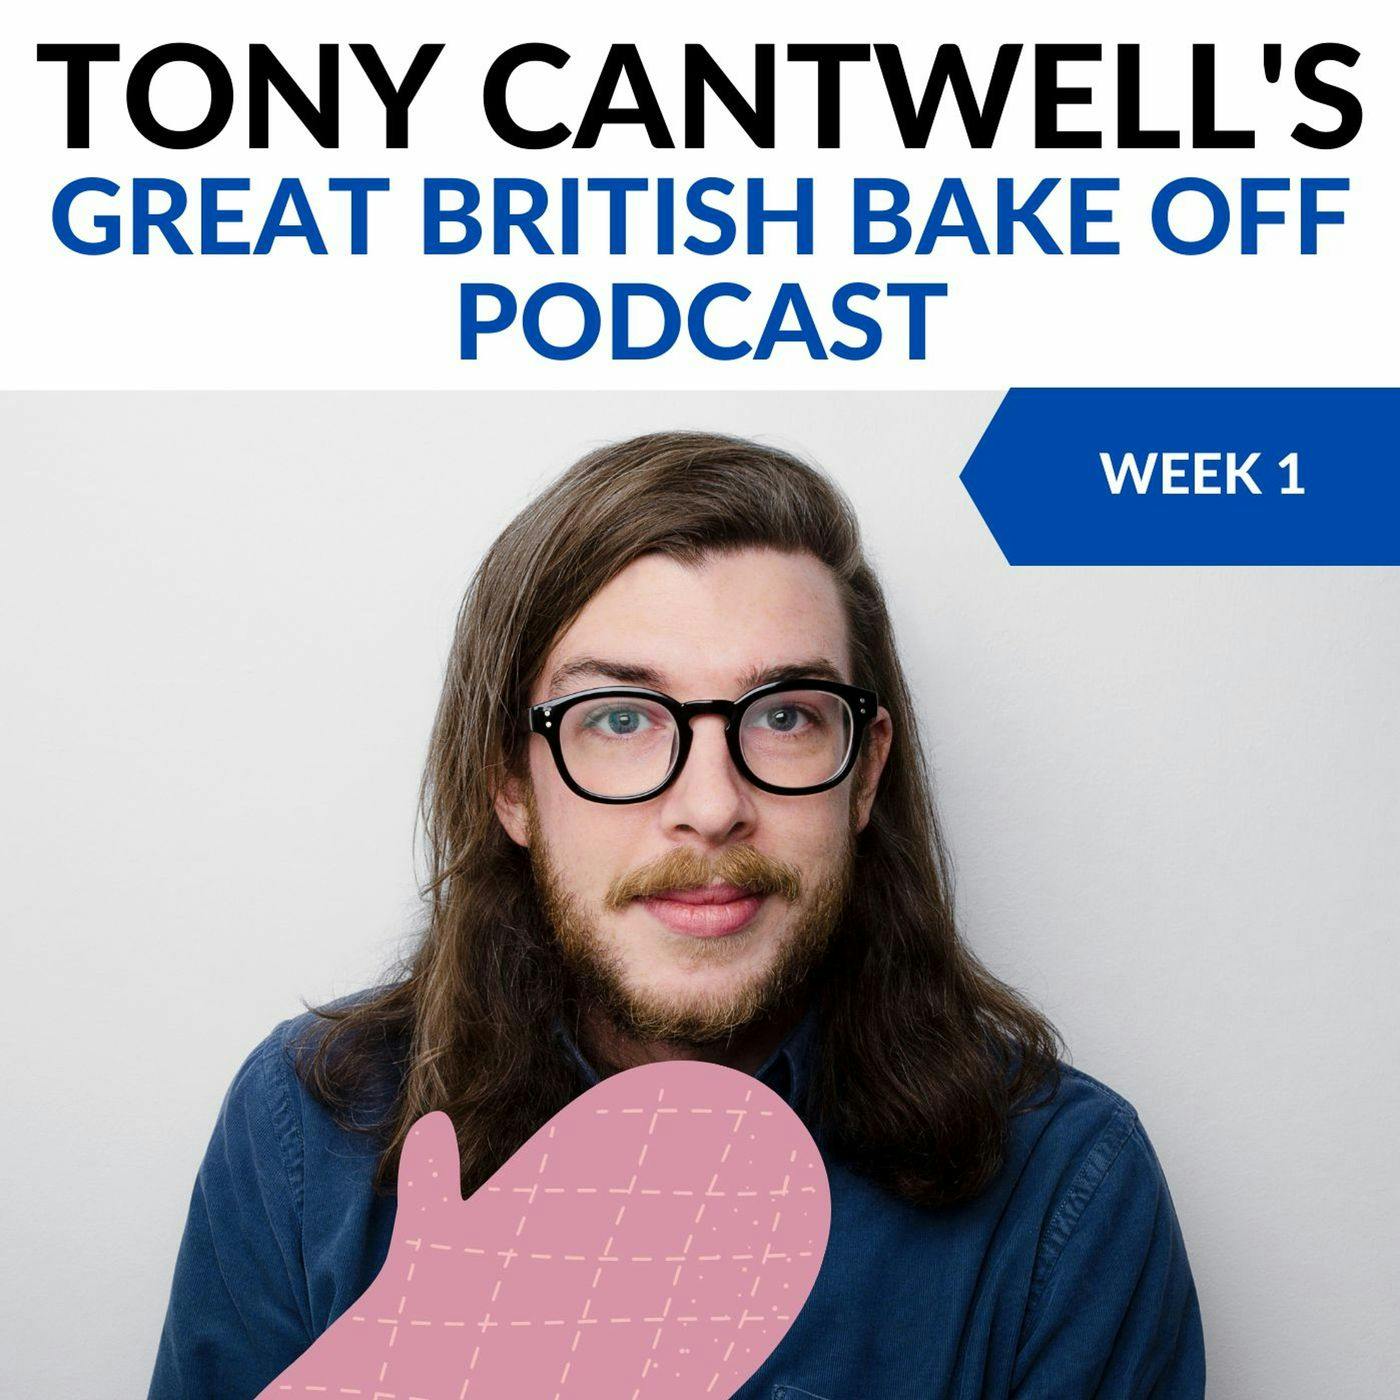 Tony Cantwell's Great British Bake Off Podcast #1 - Cake Week(S11E01)